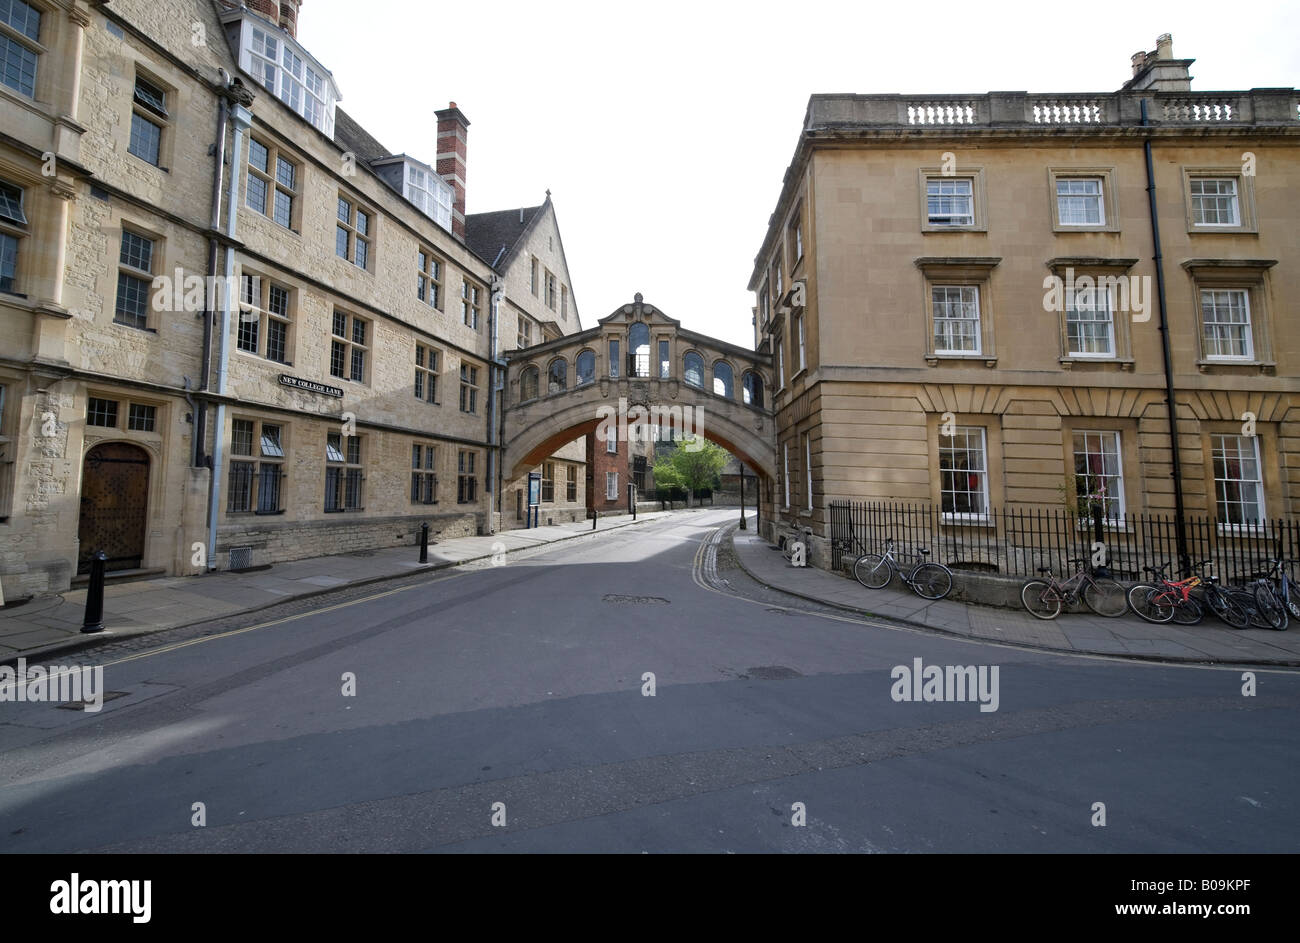 Hertford College 'Bridge of Sighs' which links the Colleges Old and New Quads Stock Photo